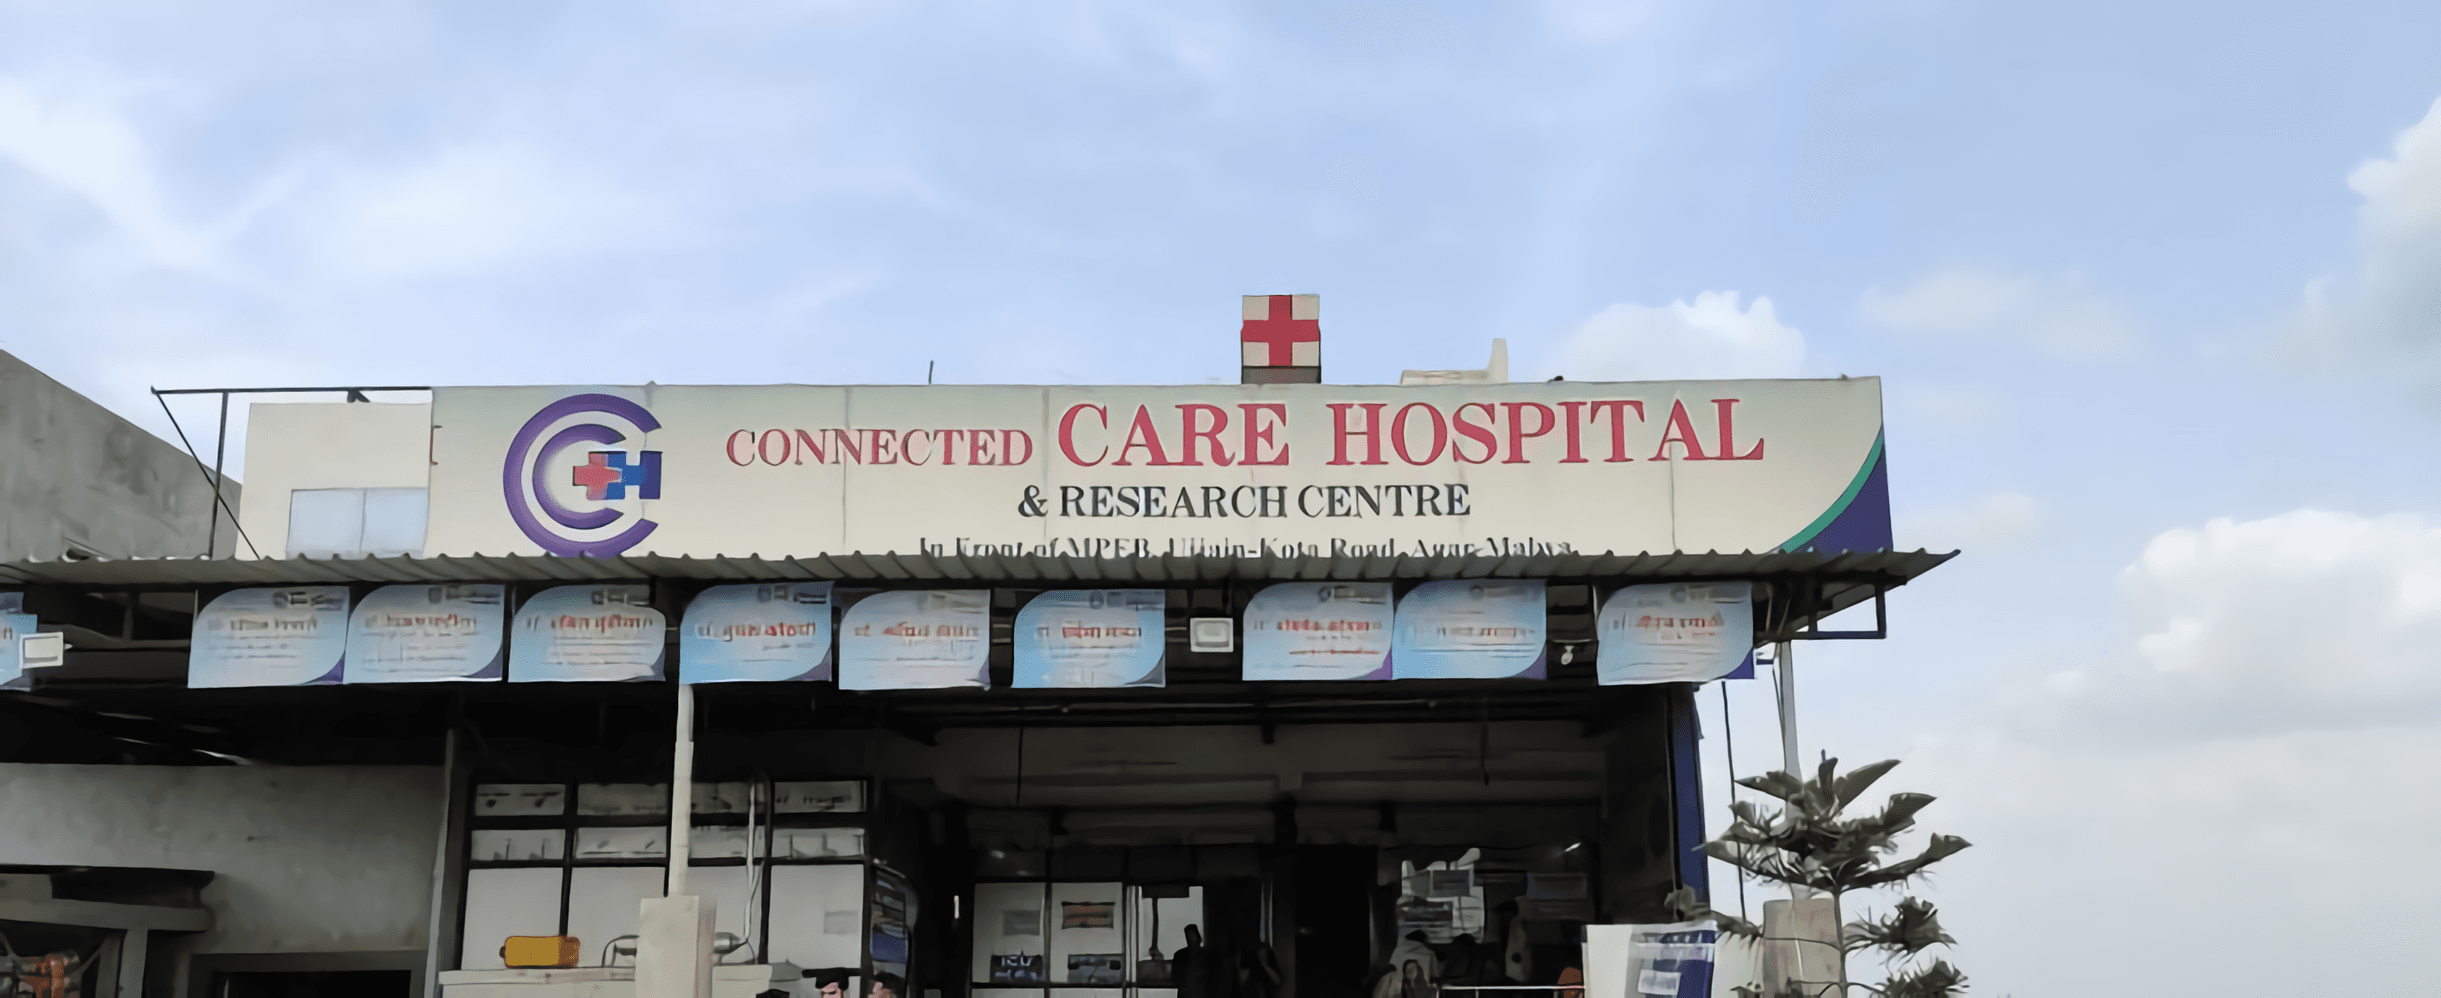 Connected Care Hospital & Research Centre